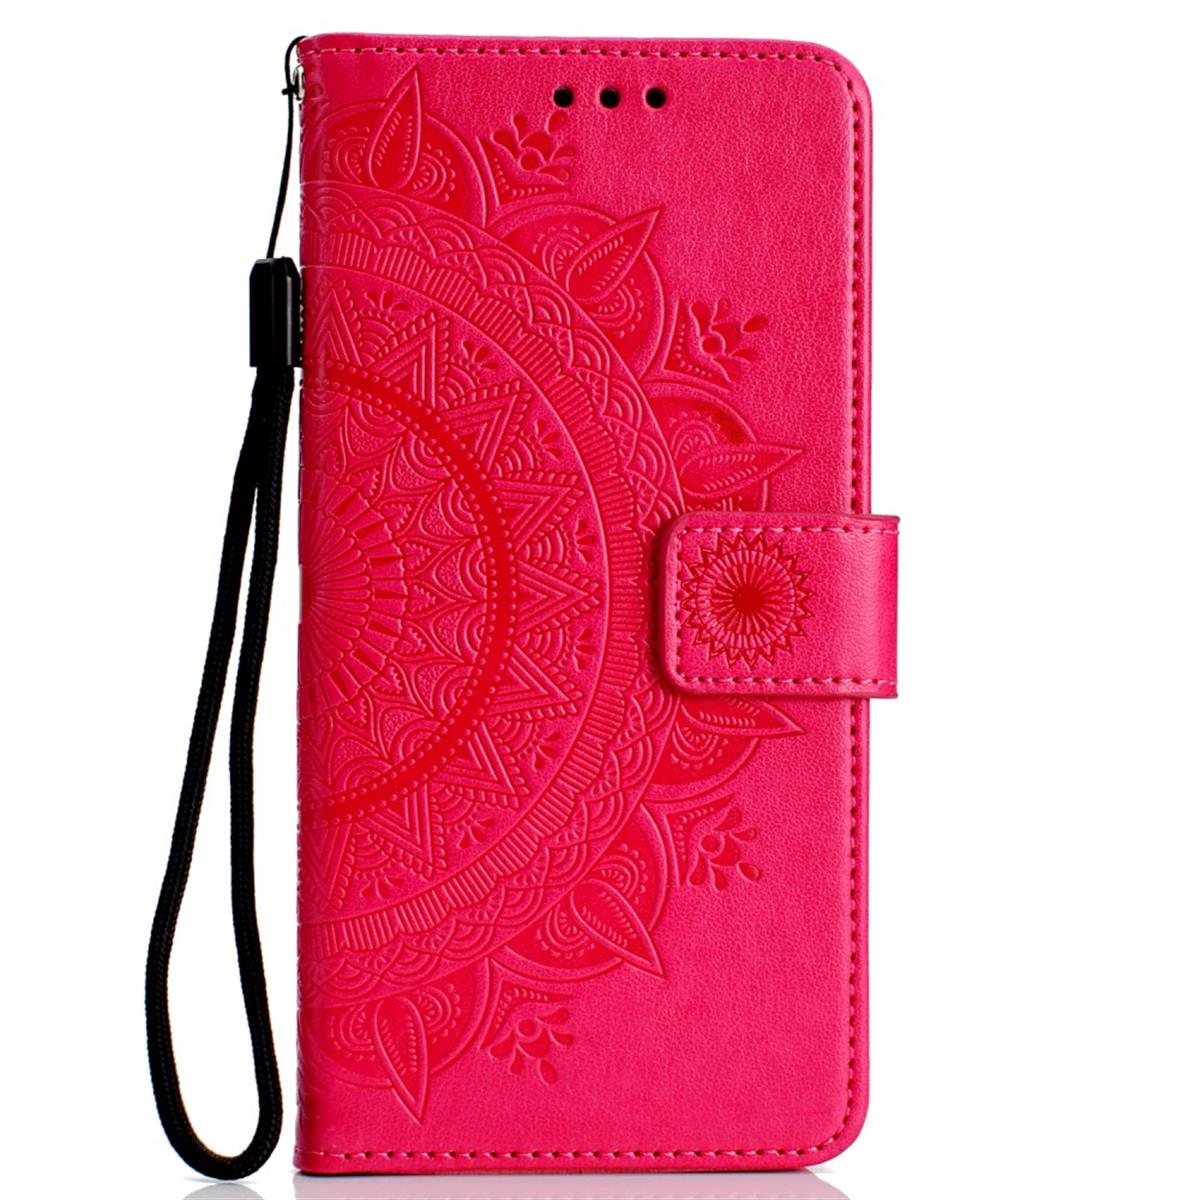 COVERKINGZ Klapphülle P30 mit Bookcover, Pro, Pink Huawei, Mandala Muster